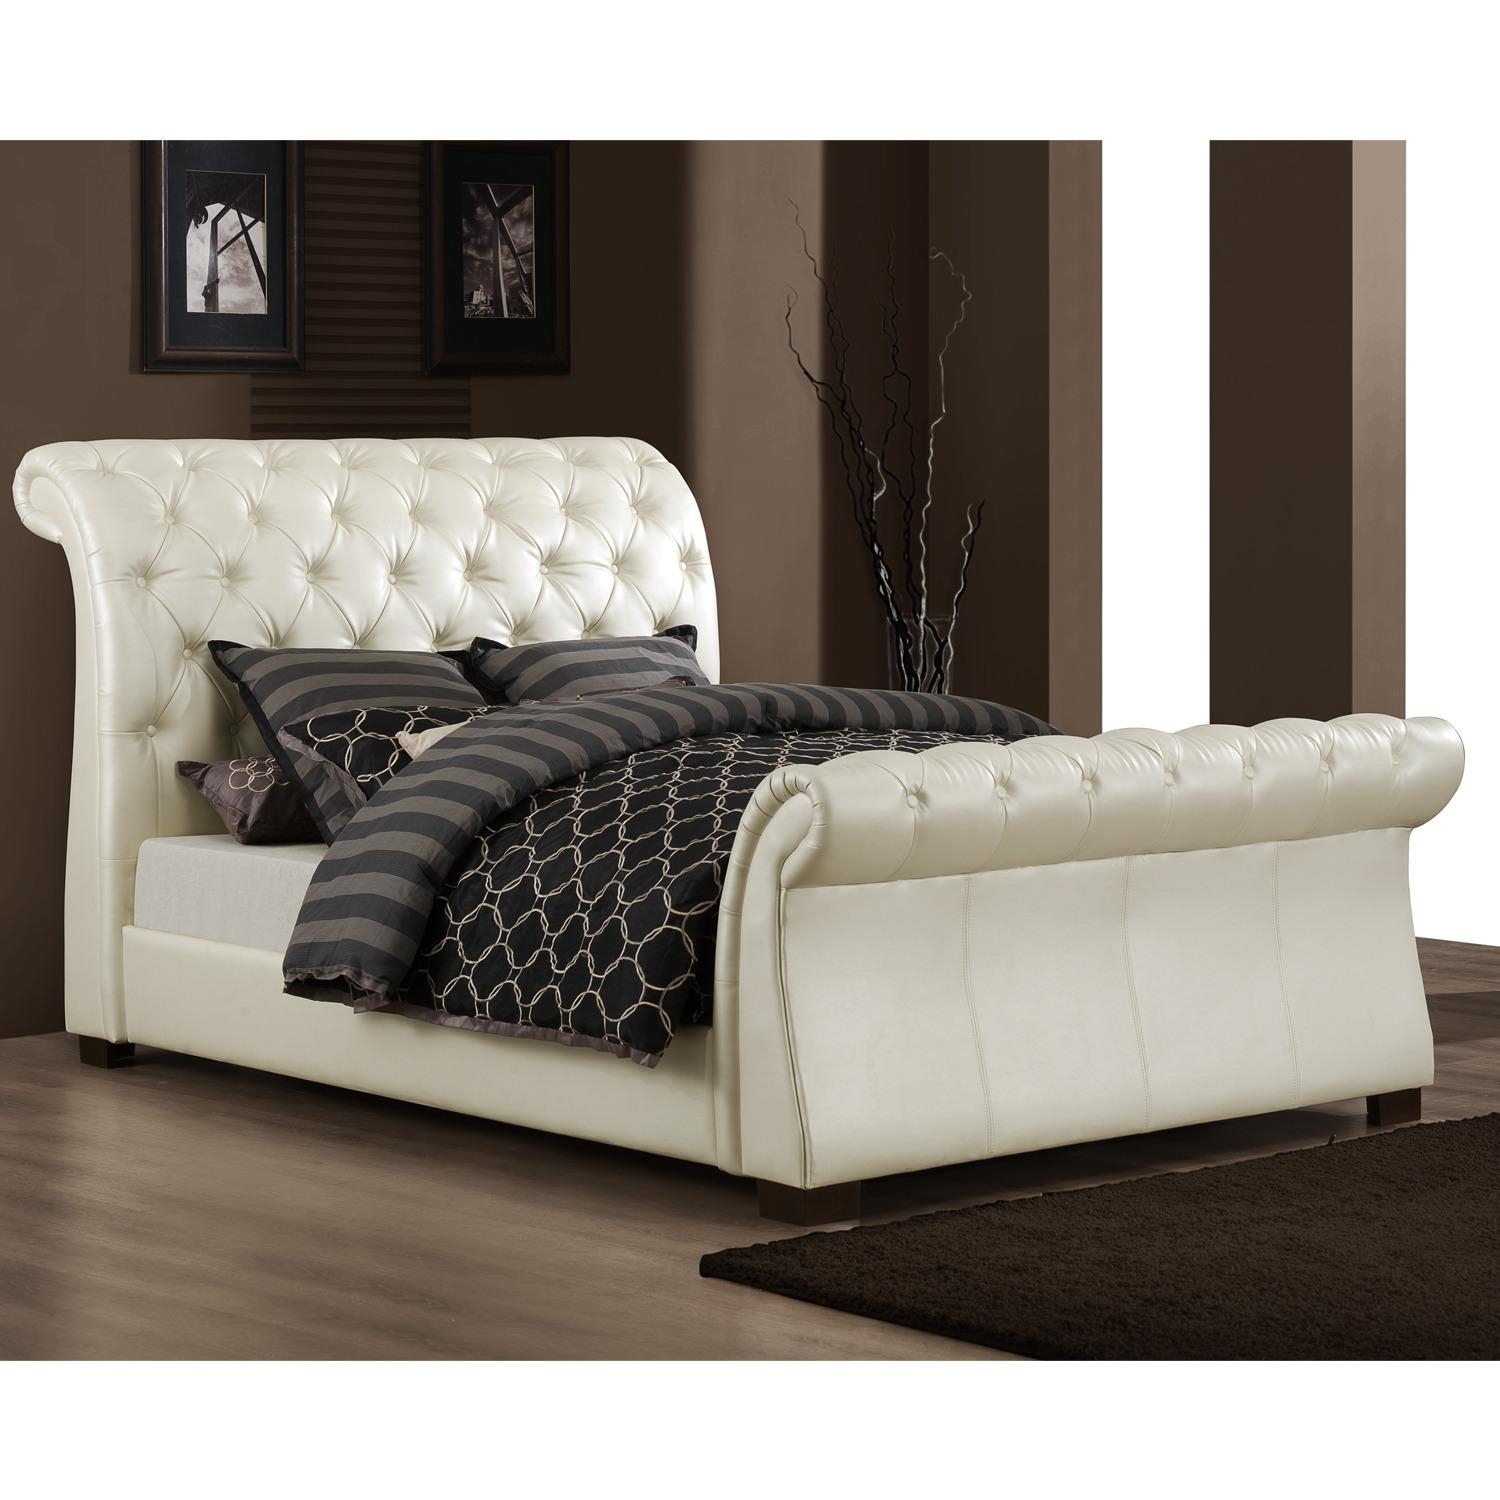 Tribecca home castela soft white faux leather king sleigh bed